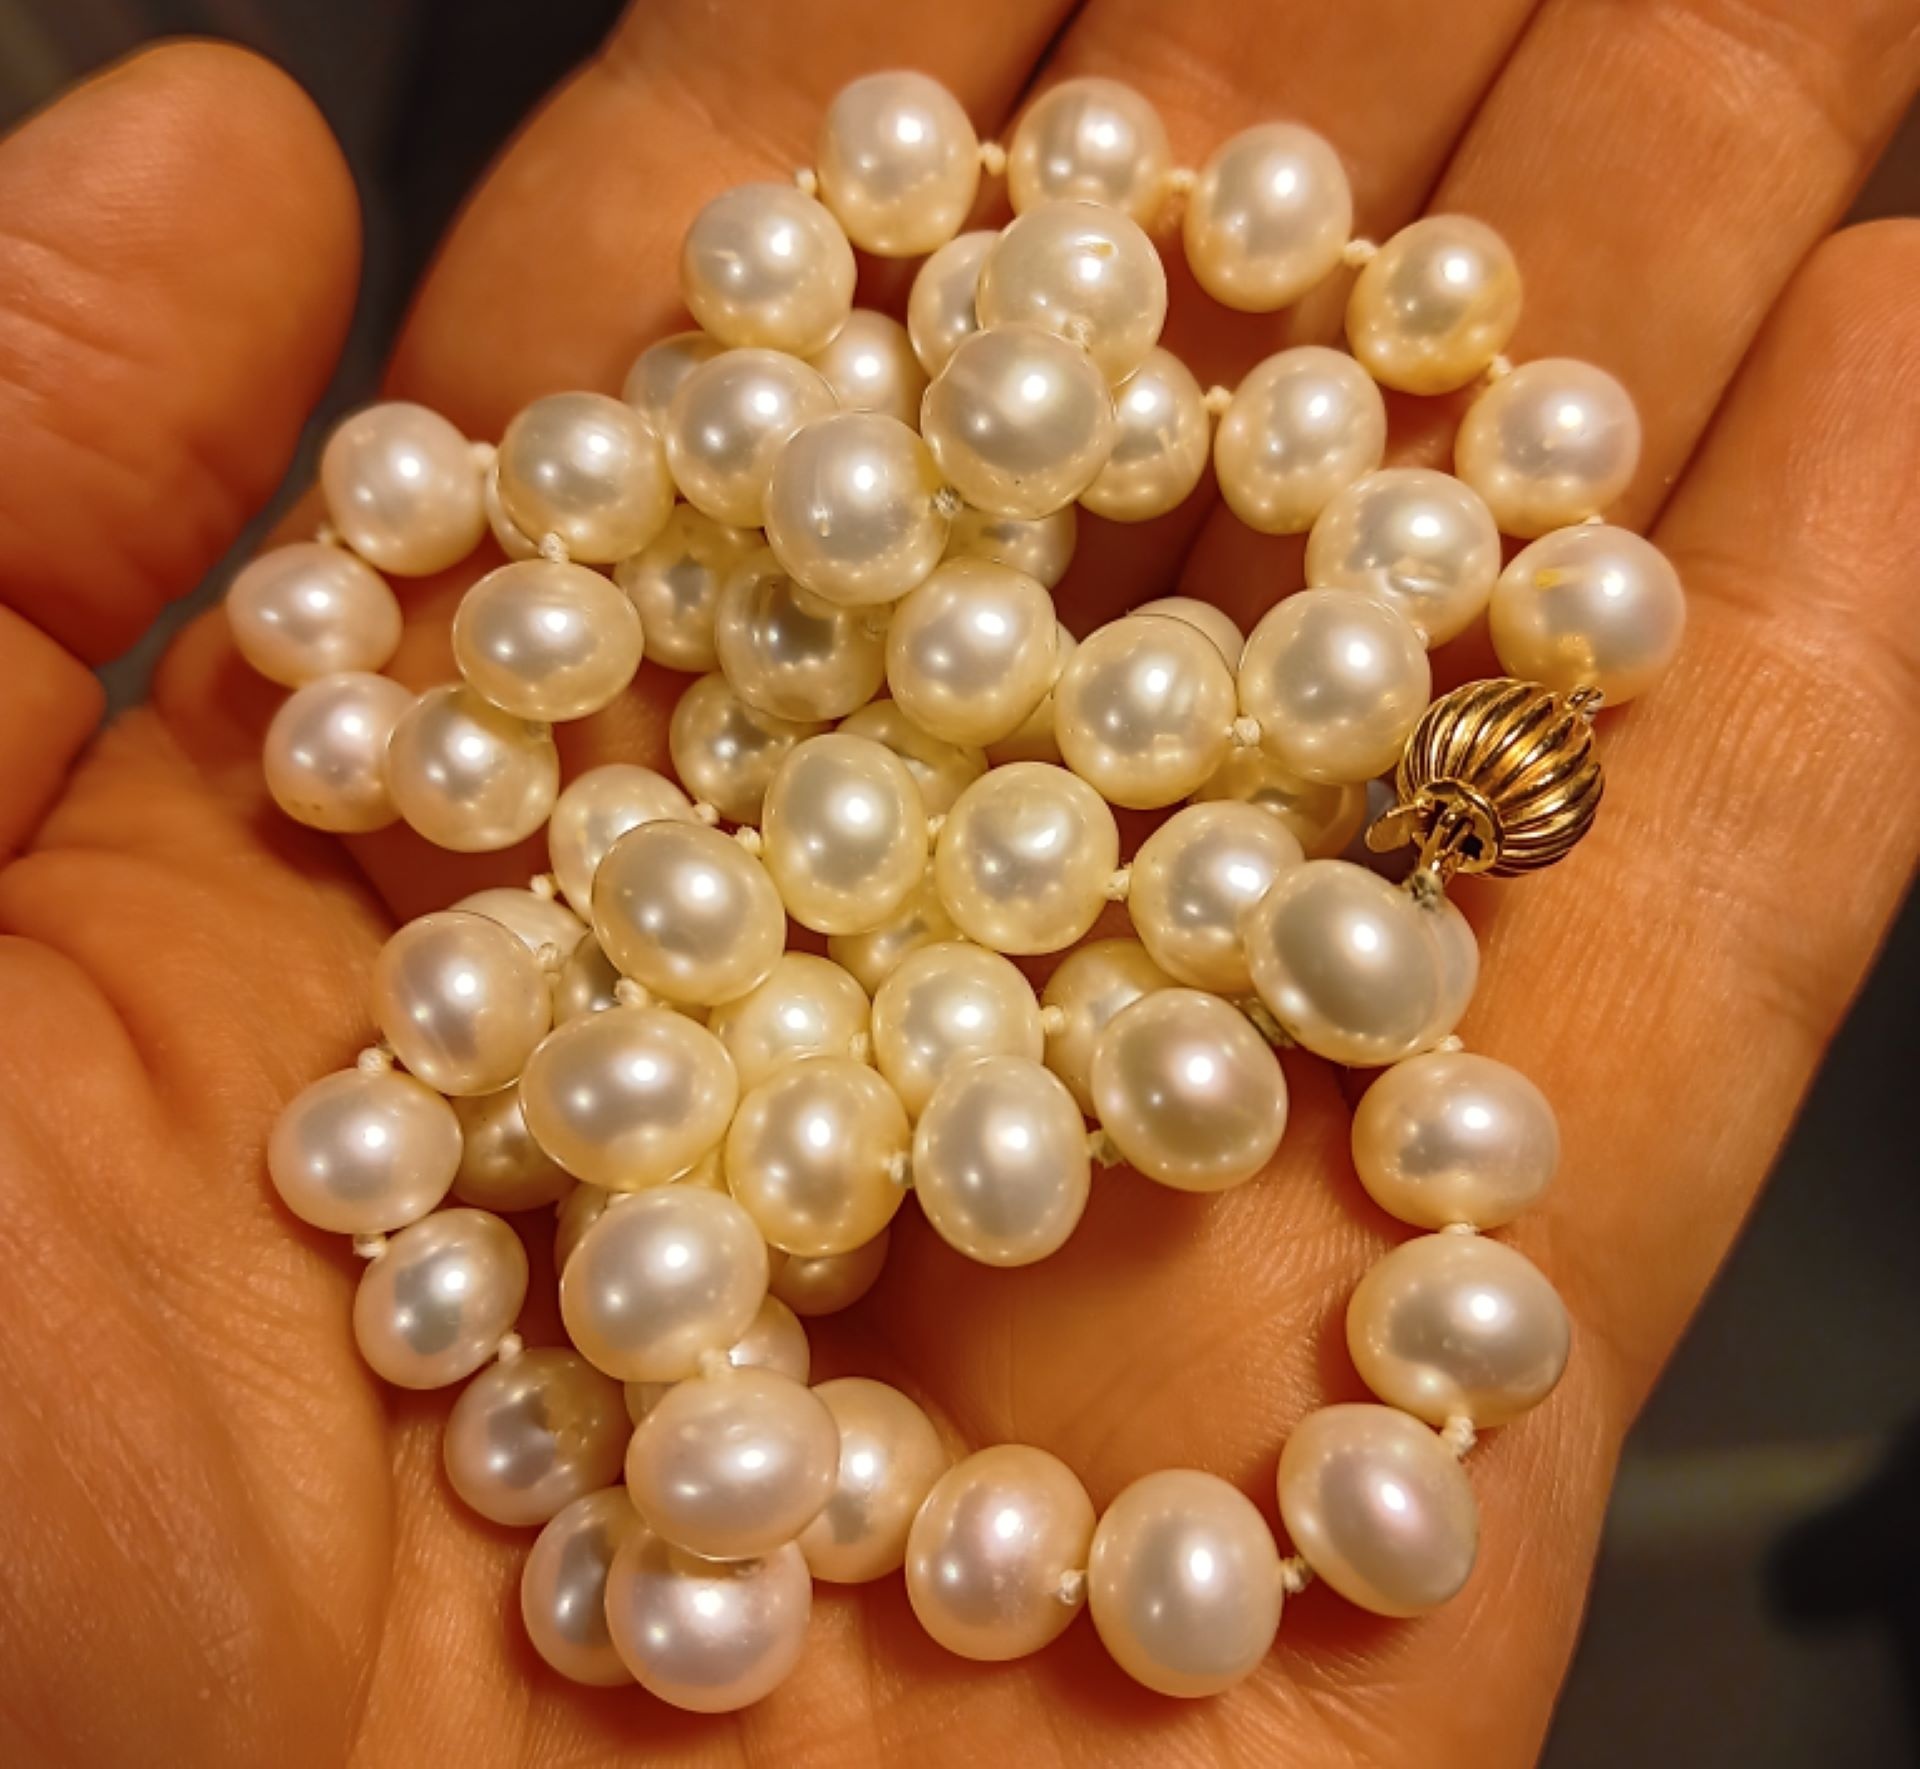 Thrift Shop With Fake Pearls And Shells And Cheap Jewelry Stock Photo -  Download Image Now - iStock